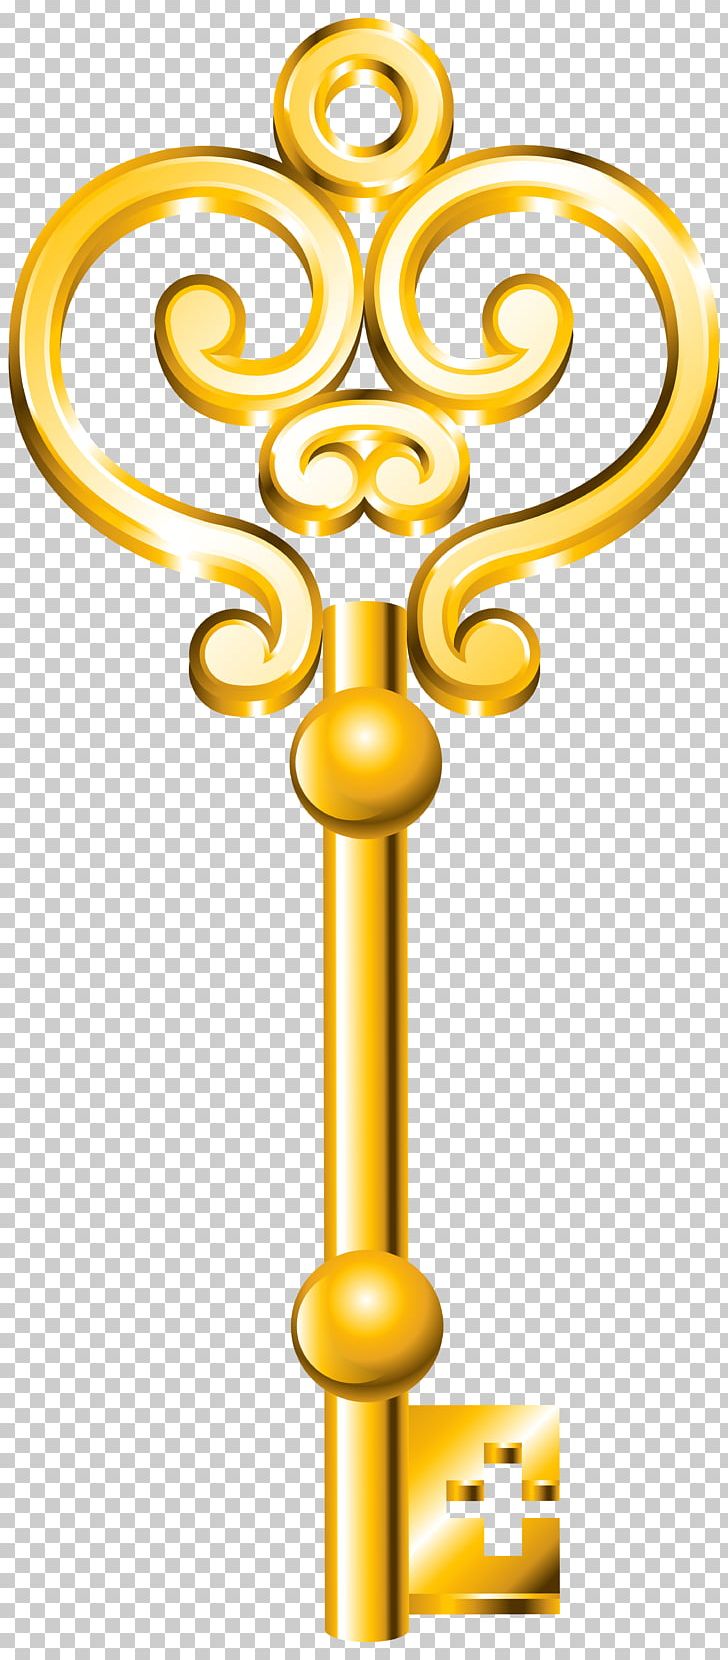 Key Chains PNG, Clipart, Body Jewelry, Clip Art, Computer Icons, Gold, Image File Formats Free PNG Download